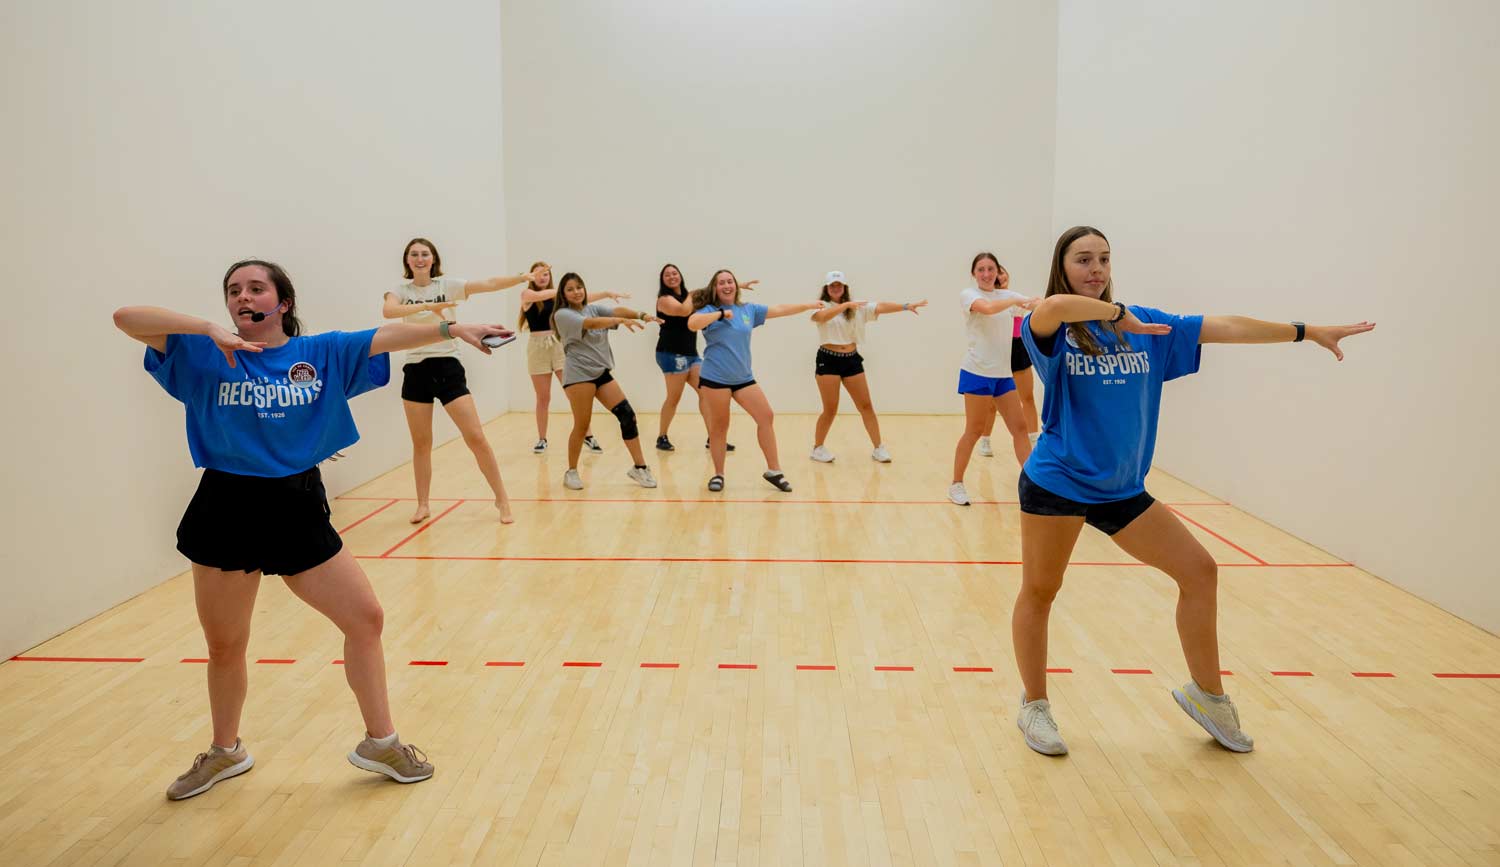 Students engage in a zumba class led by student fitness instructors